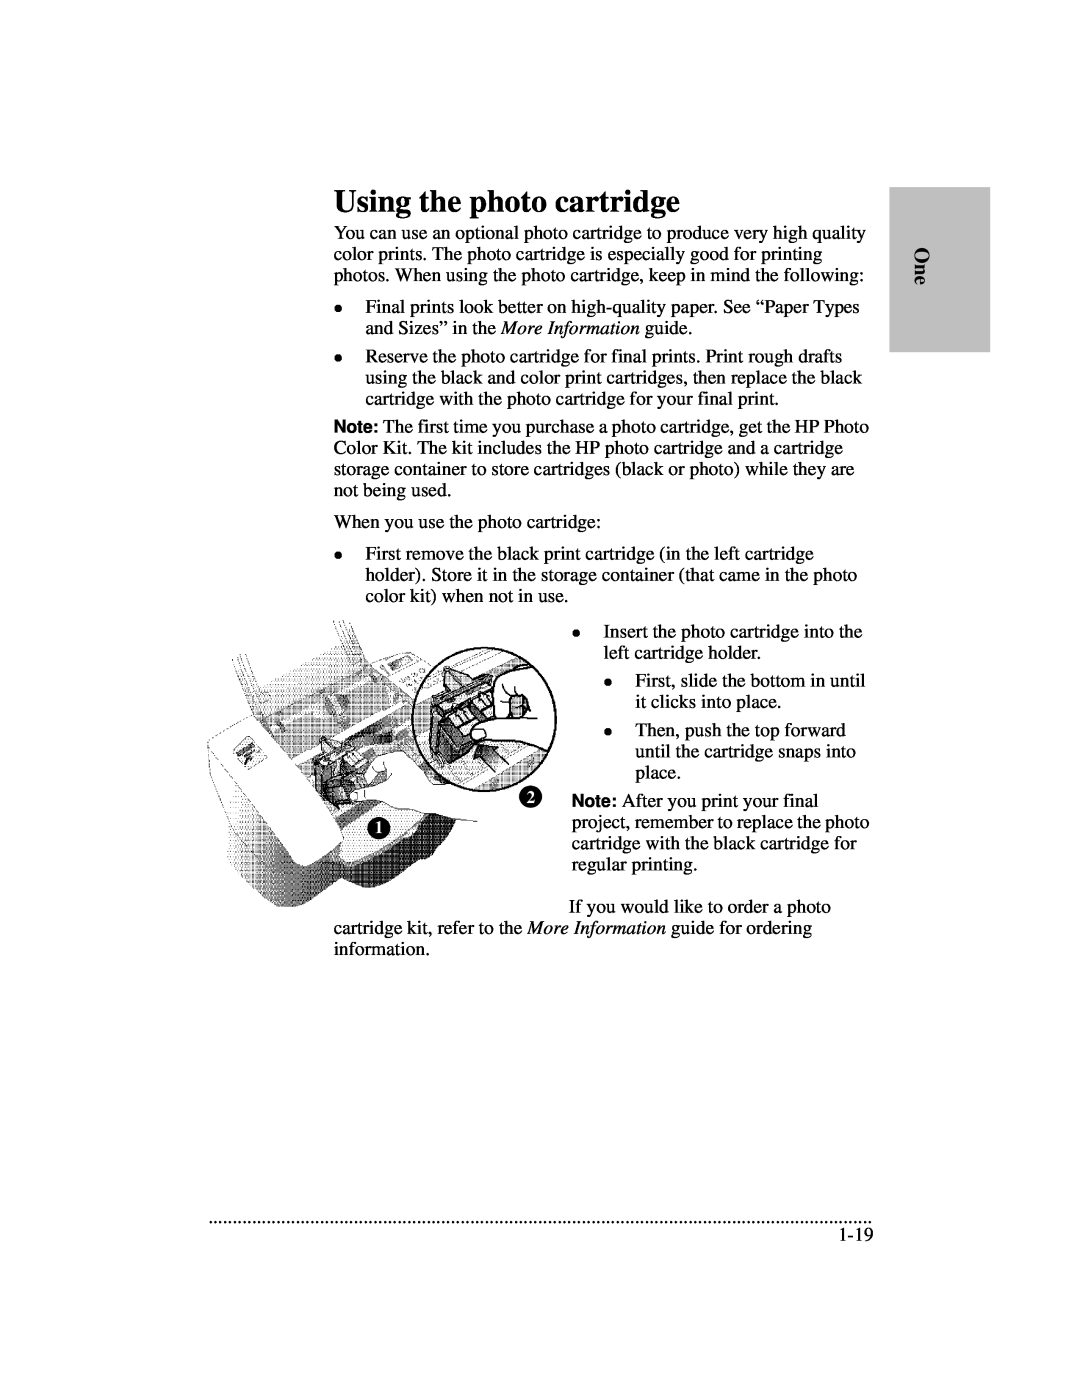 HP 700 manual Using the photo cartridge, cartridge with the black cartridge for 